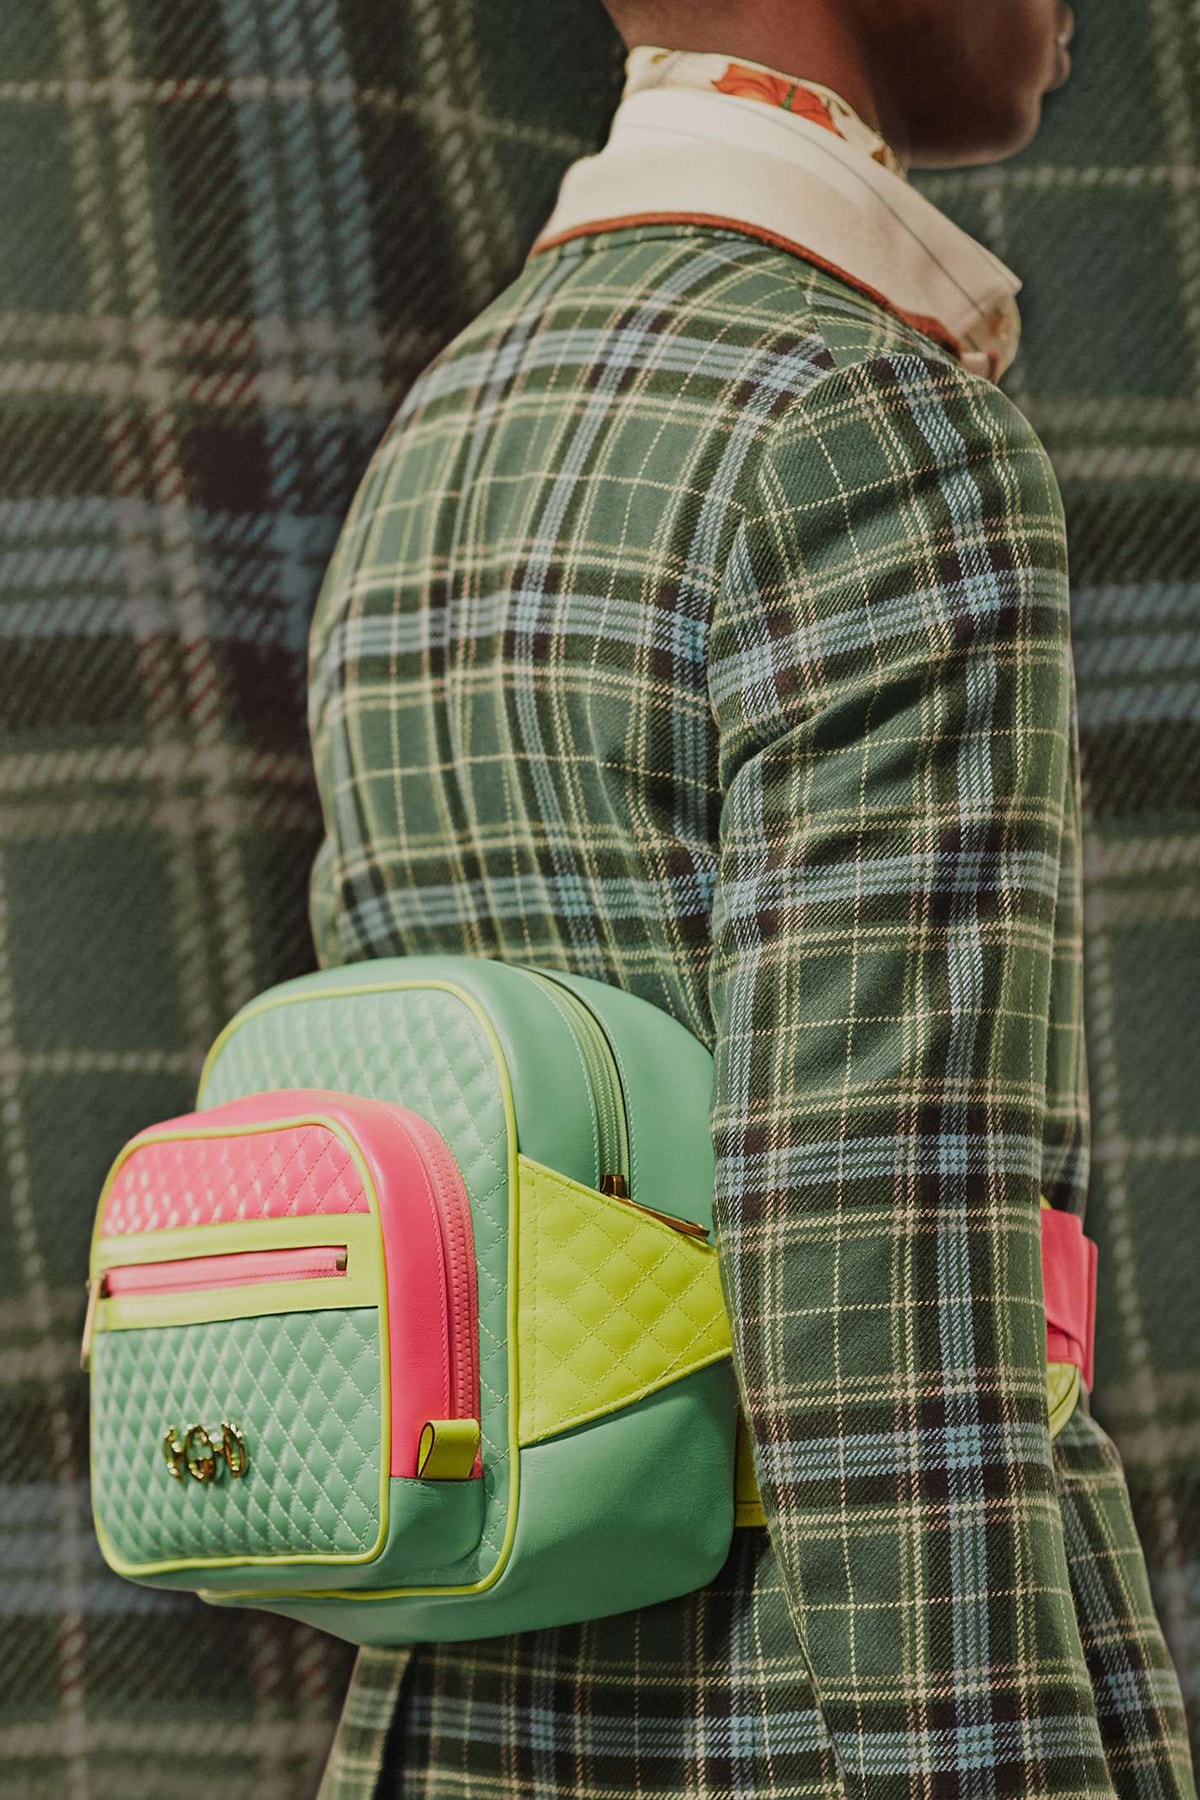 Gucci Cruise 2019 Runway Details Fanny Pack Neon Green Pink Plaid